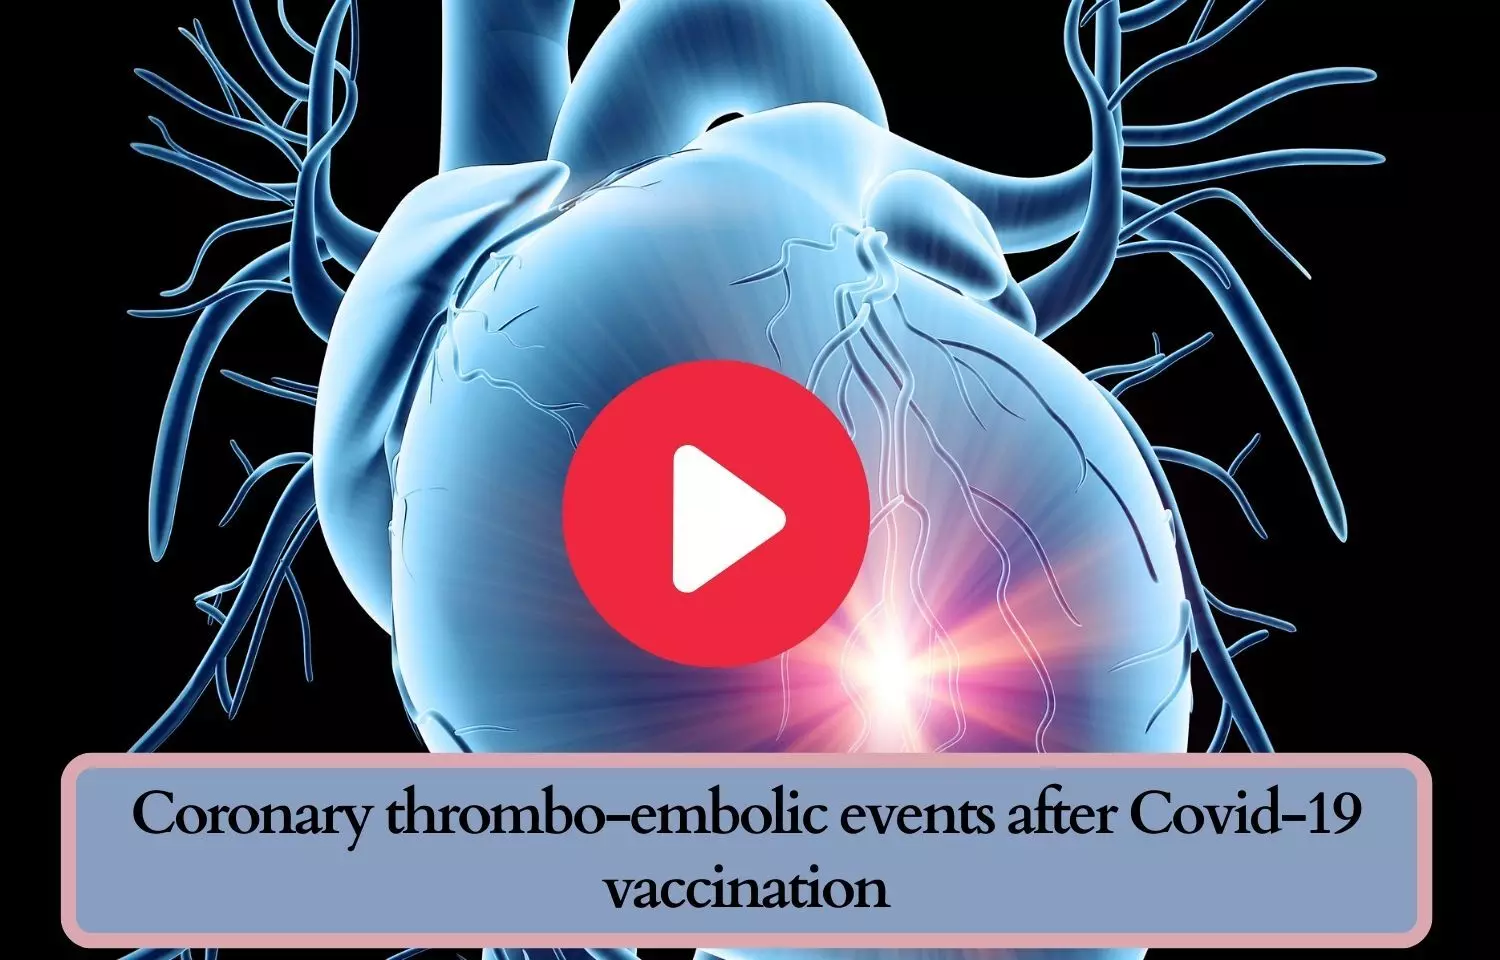 Coronary thrombo-embolic events after Covid-19 vaccination